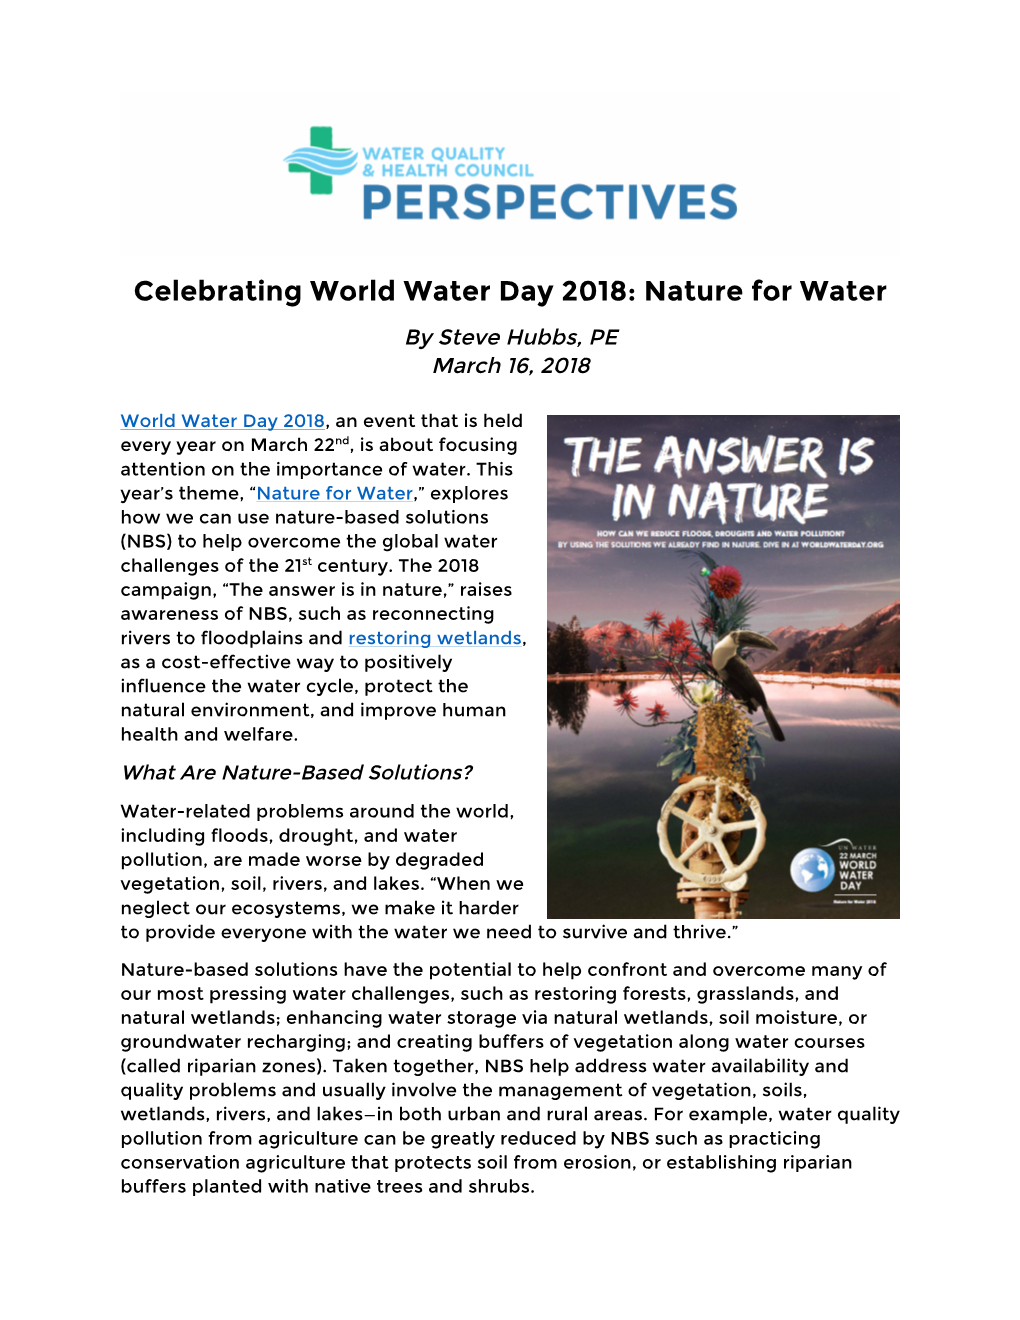 Celebrating World Water Day 2018: Nature for Water by Steve Hubbs, PE March 16, 2018